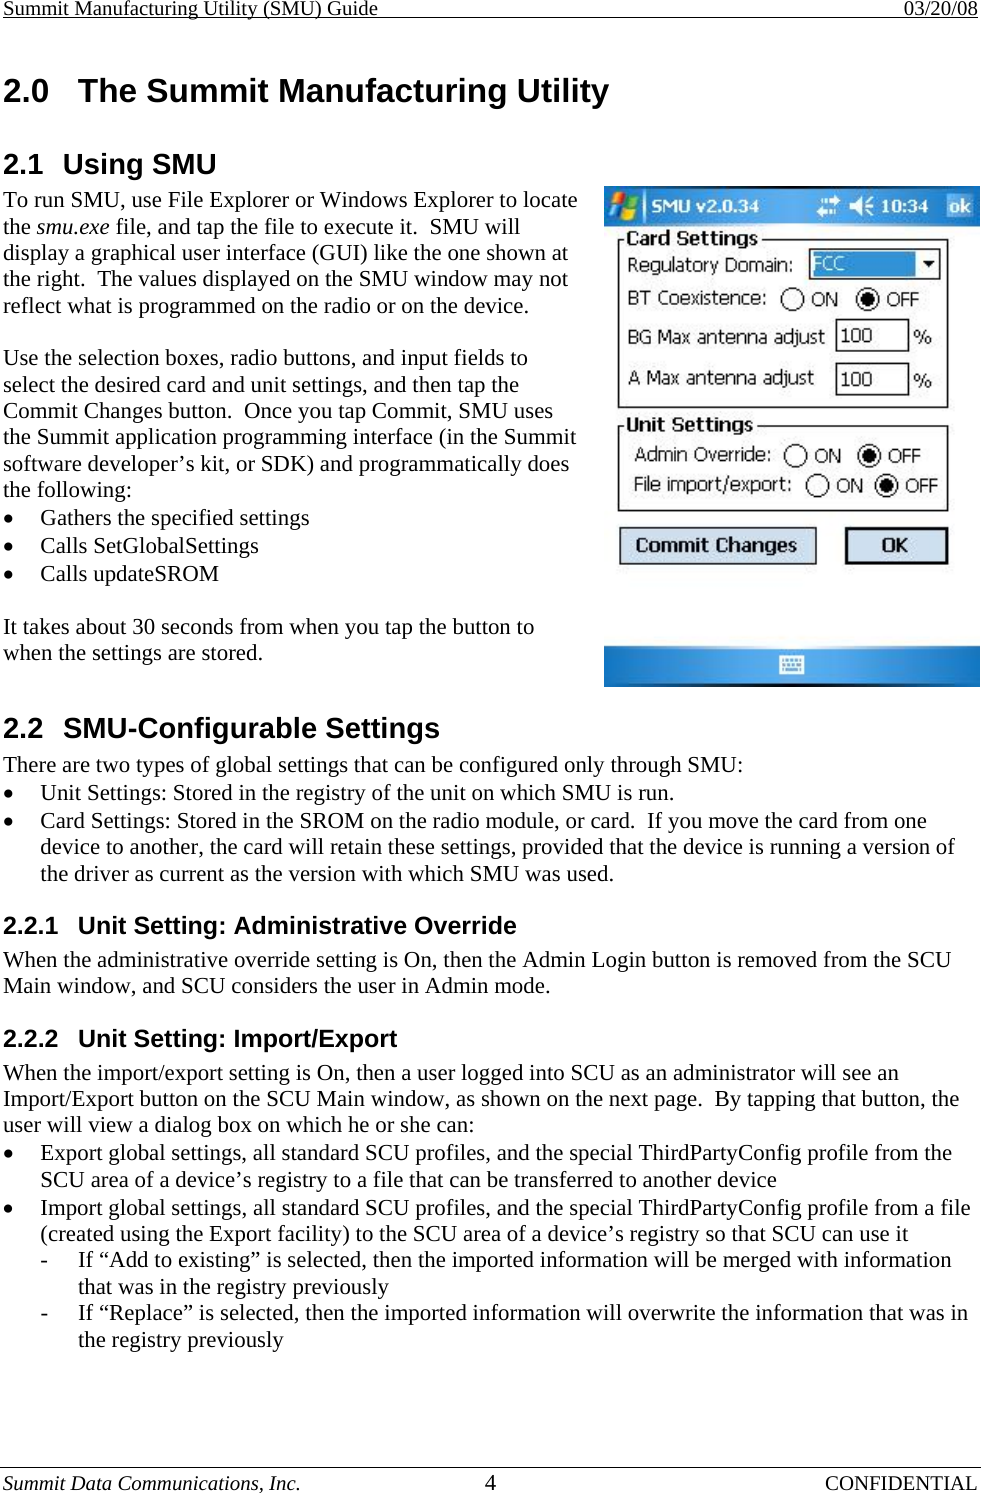 Summit Manufacturing Utility (SMU) Guide    03/20/08 Summit Data Communications, Inc.  4 CONFIDENTIAL 2.0  The Summit Manufacturing Utility 2.1 Using SMU To run SMU, use File Explorer or Windows Explorer to locate the smu.exe file, and tap the file to execute it.  SMU will display a graphical user interface (GUI) like the one shown at the right.  The values displayed on the SMU window may not reflect what is programmed on the radio or on the device.  Use the selection boxes, radio buttons, and input fields to select the desired card and unit settings, and then tap the Commit Changes button.  Once you tap Commit, SMU uses the Summit application programming interface (in the Summit software developer’s kit, or SDK) and programmatically does the following: •  Gathers the specified settings •  Calls SetGlobalSettings •  Calls updateSROM  It takes about 30 seconds from when you tap the button to when the settings are stored. 2.2 SMU-Configurable Settings There are two types of global settings that can be configured only through SMU: •  Unit Settings: Stored in the registry of the unit on which SMU is run. •  Card Settings: Stored in the SROM on the radio module, or card.  If you move the card from one device to another, the card will retain these settings, provided that the device is running a version of the driver as current as the version with which SMU was used. 2.2.1  Unit Setting: Administrative Override When the administrative override setting is On, then the Admin Login button is removed from the SCU Main window, and SCU considers the user in Admin mode. 2.2.2  Unit Setting: Import/Export When the import/export setting is On, then a user logged into SCU as an administrator will see an Import/Export button on the SCU Main window, as shown on the next page.  By tapping that button, the user will view a dialog box on which he or she can: •  Export global settings, all standard SCU profiles, and the special ThirdPartyConfig profile from the SCU area of a device’s registry to a file that can be transferred to another device •  Import global settings, all standard SCU profiles, and the special ThirdPartyConfig profile from a file (created using the Export facility) to the SCU area of a device’s registry so that SCU can use it -  If “Add to existing” is selected, then the imported information will be merged with information that was in the registry previously -  If “Replace” is selected, then the imported information will overwrite the information that was in the registry previously  